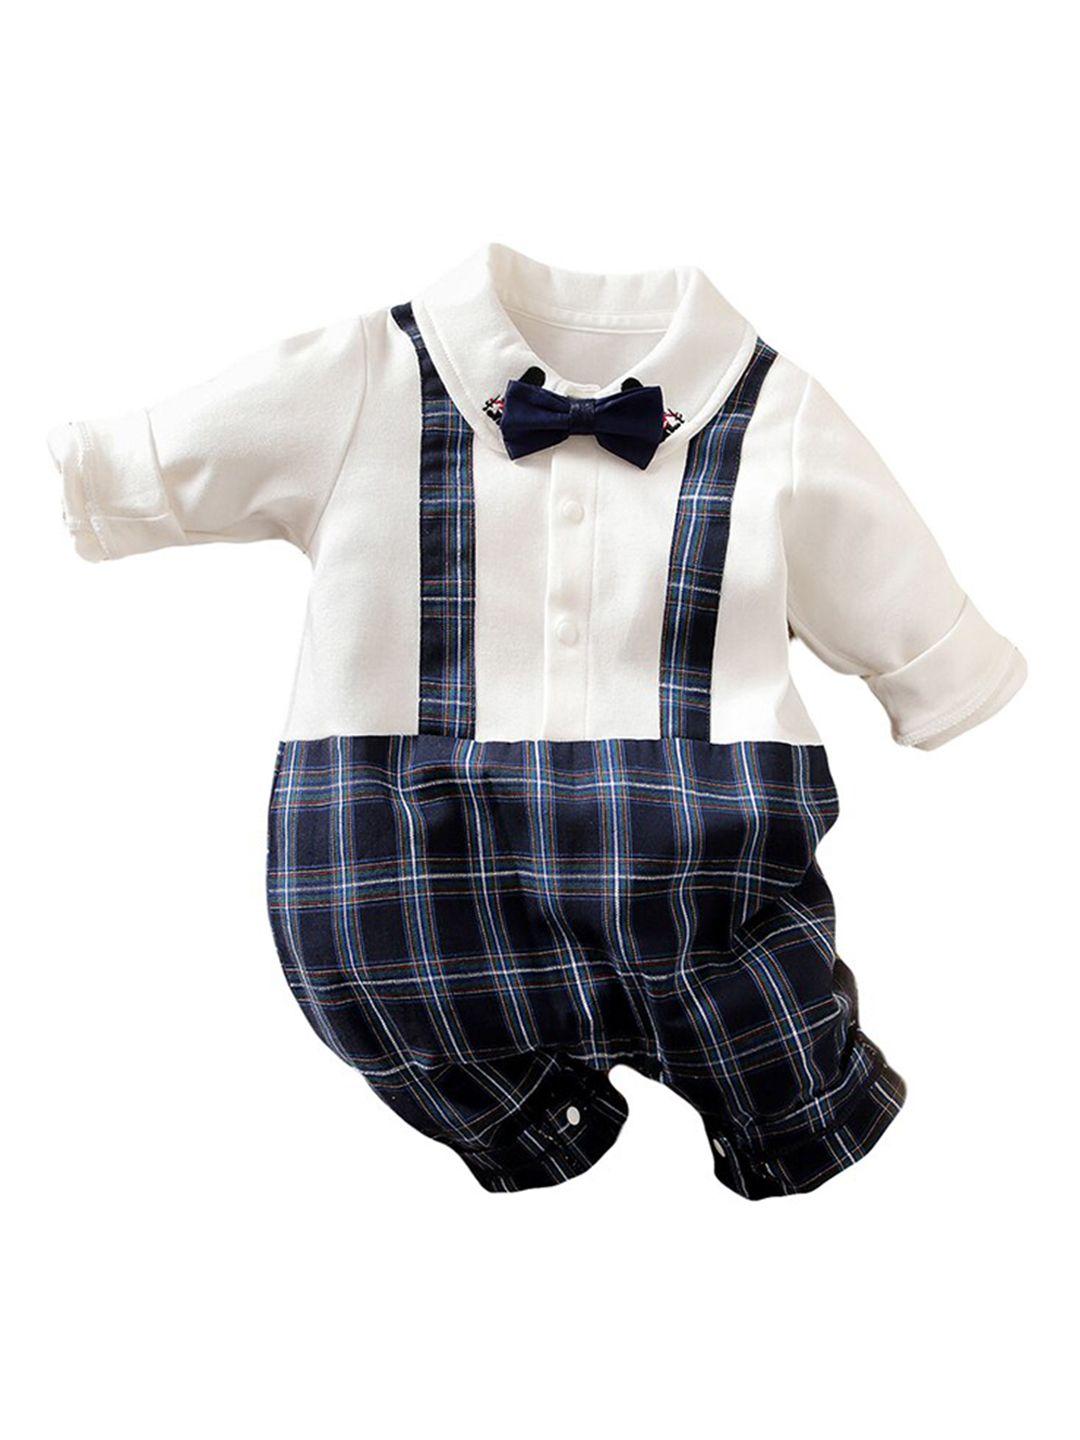 stylecast infant boys navy blue checked pure cotton rompers